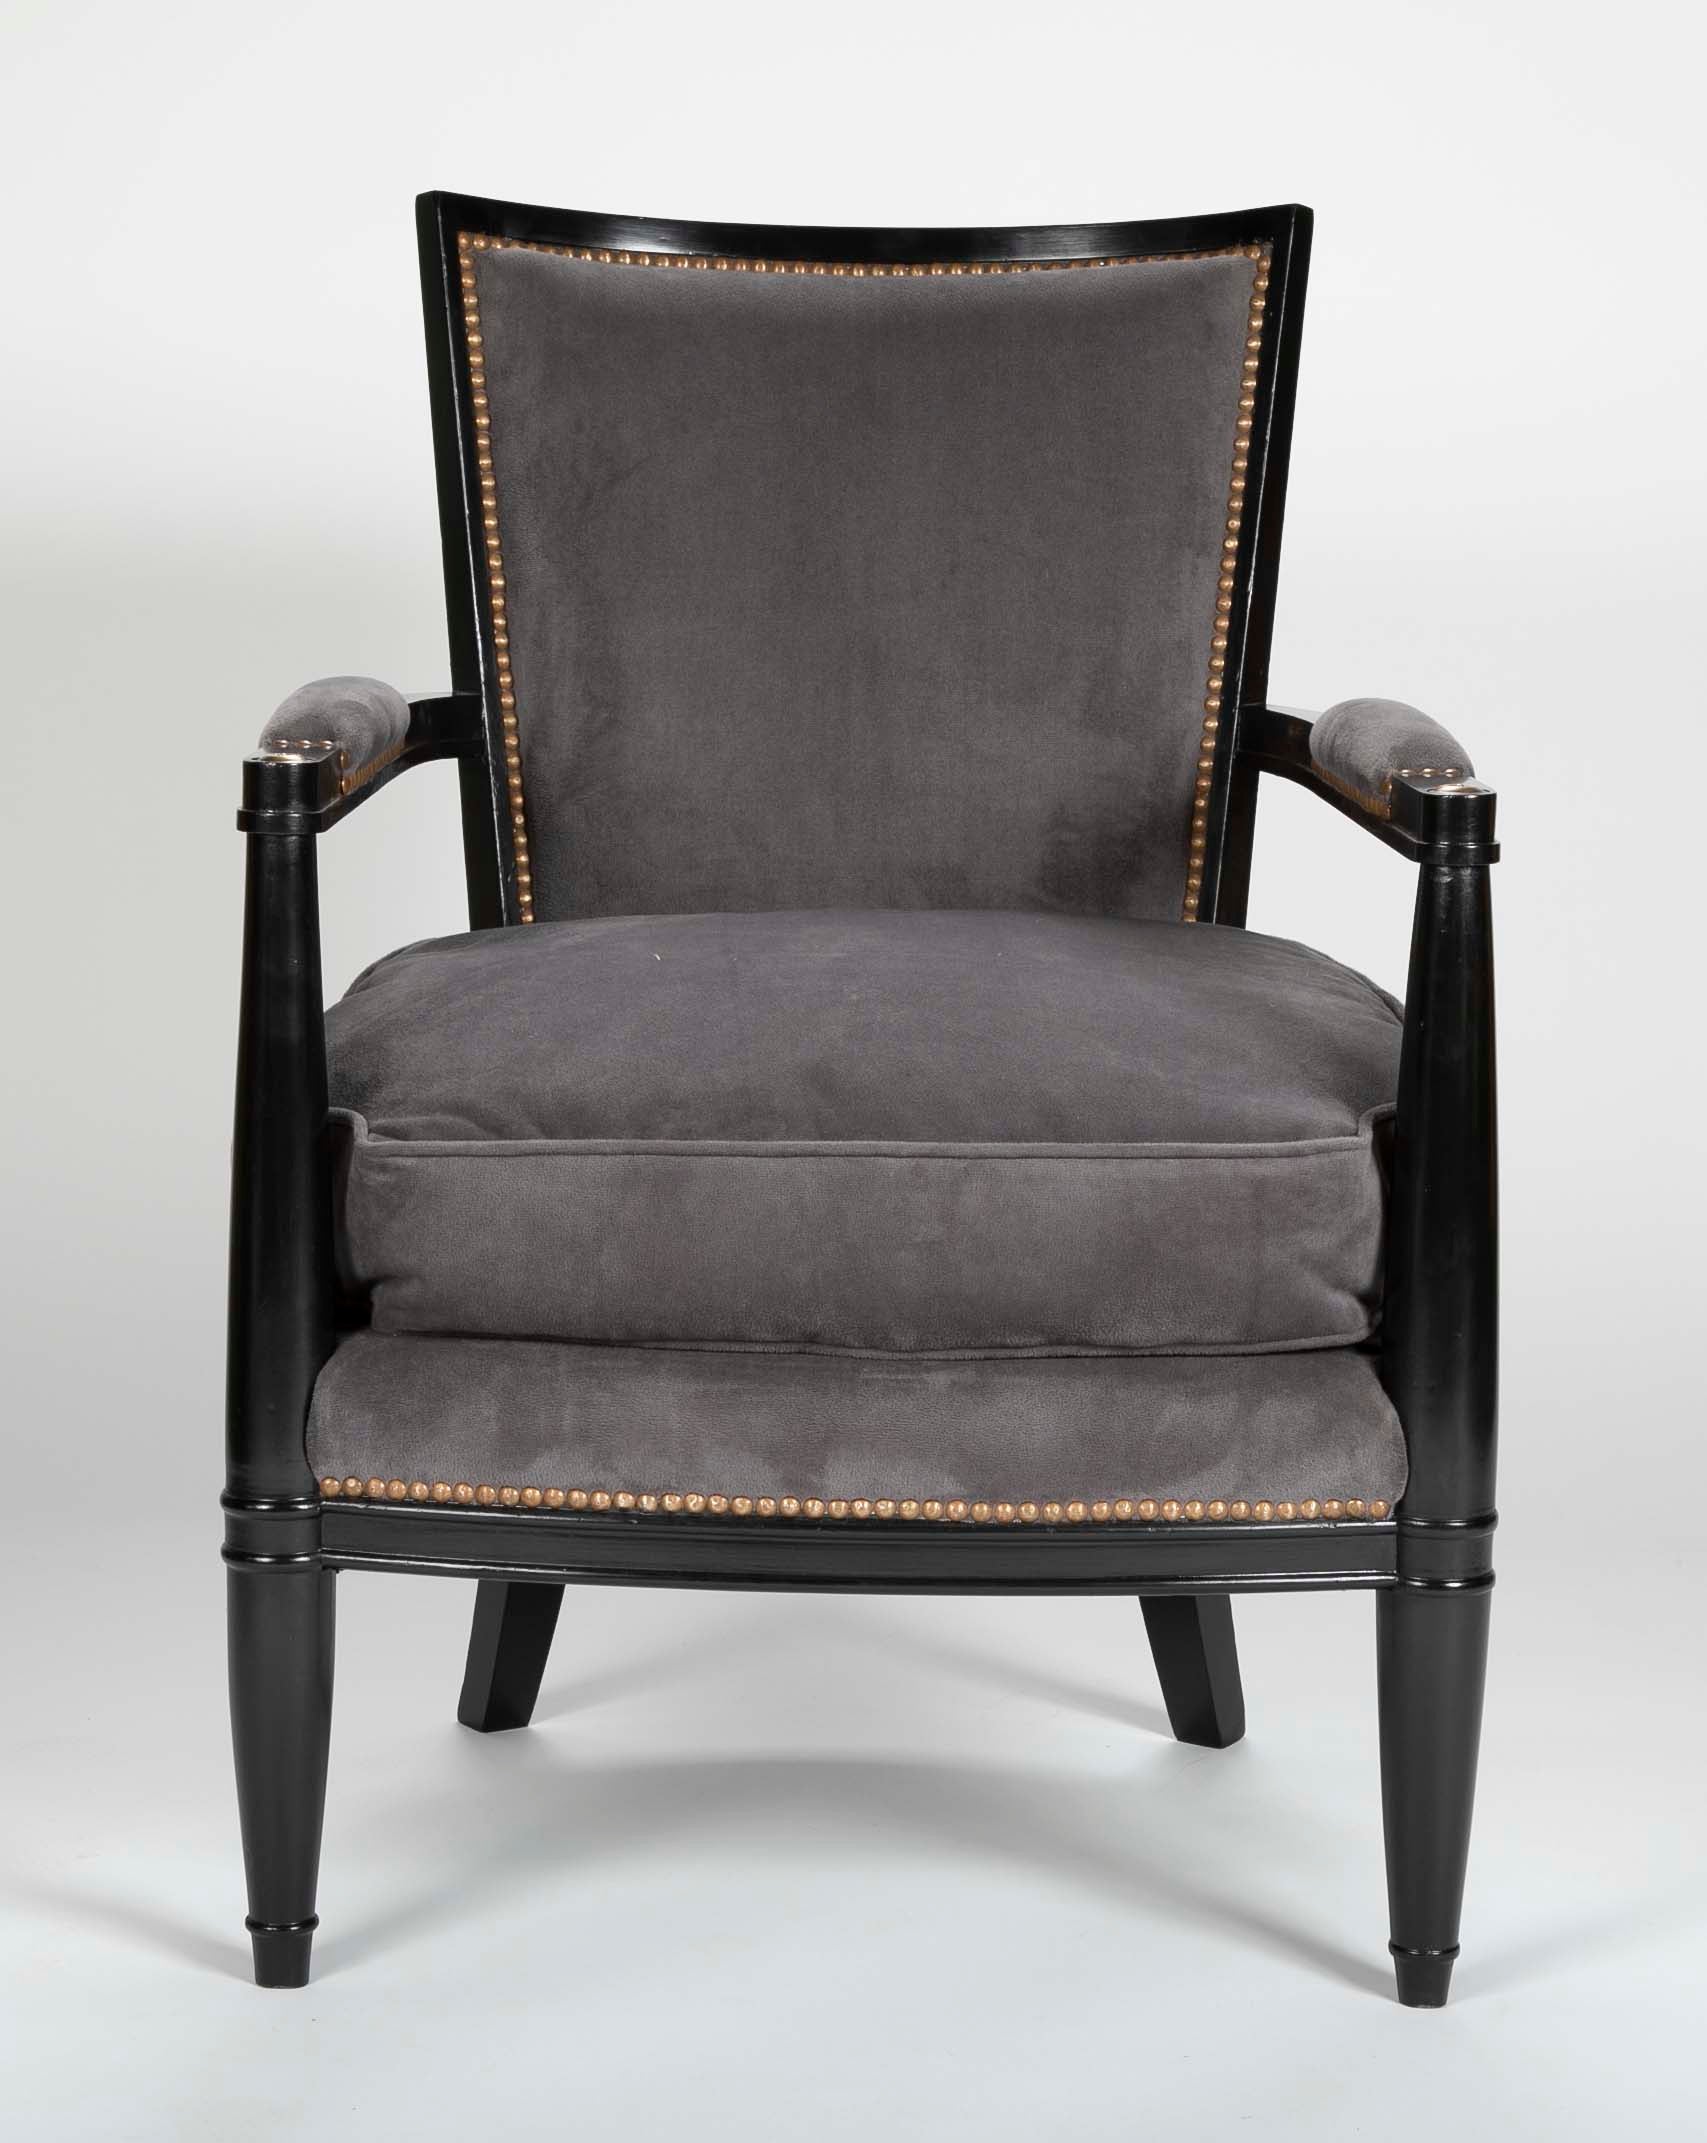 Pair of Ebonized Open Arm Chairs French Directoire in the Manner of Andre Arbus